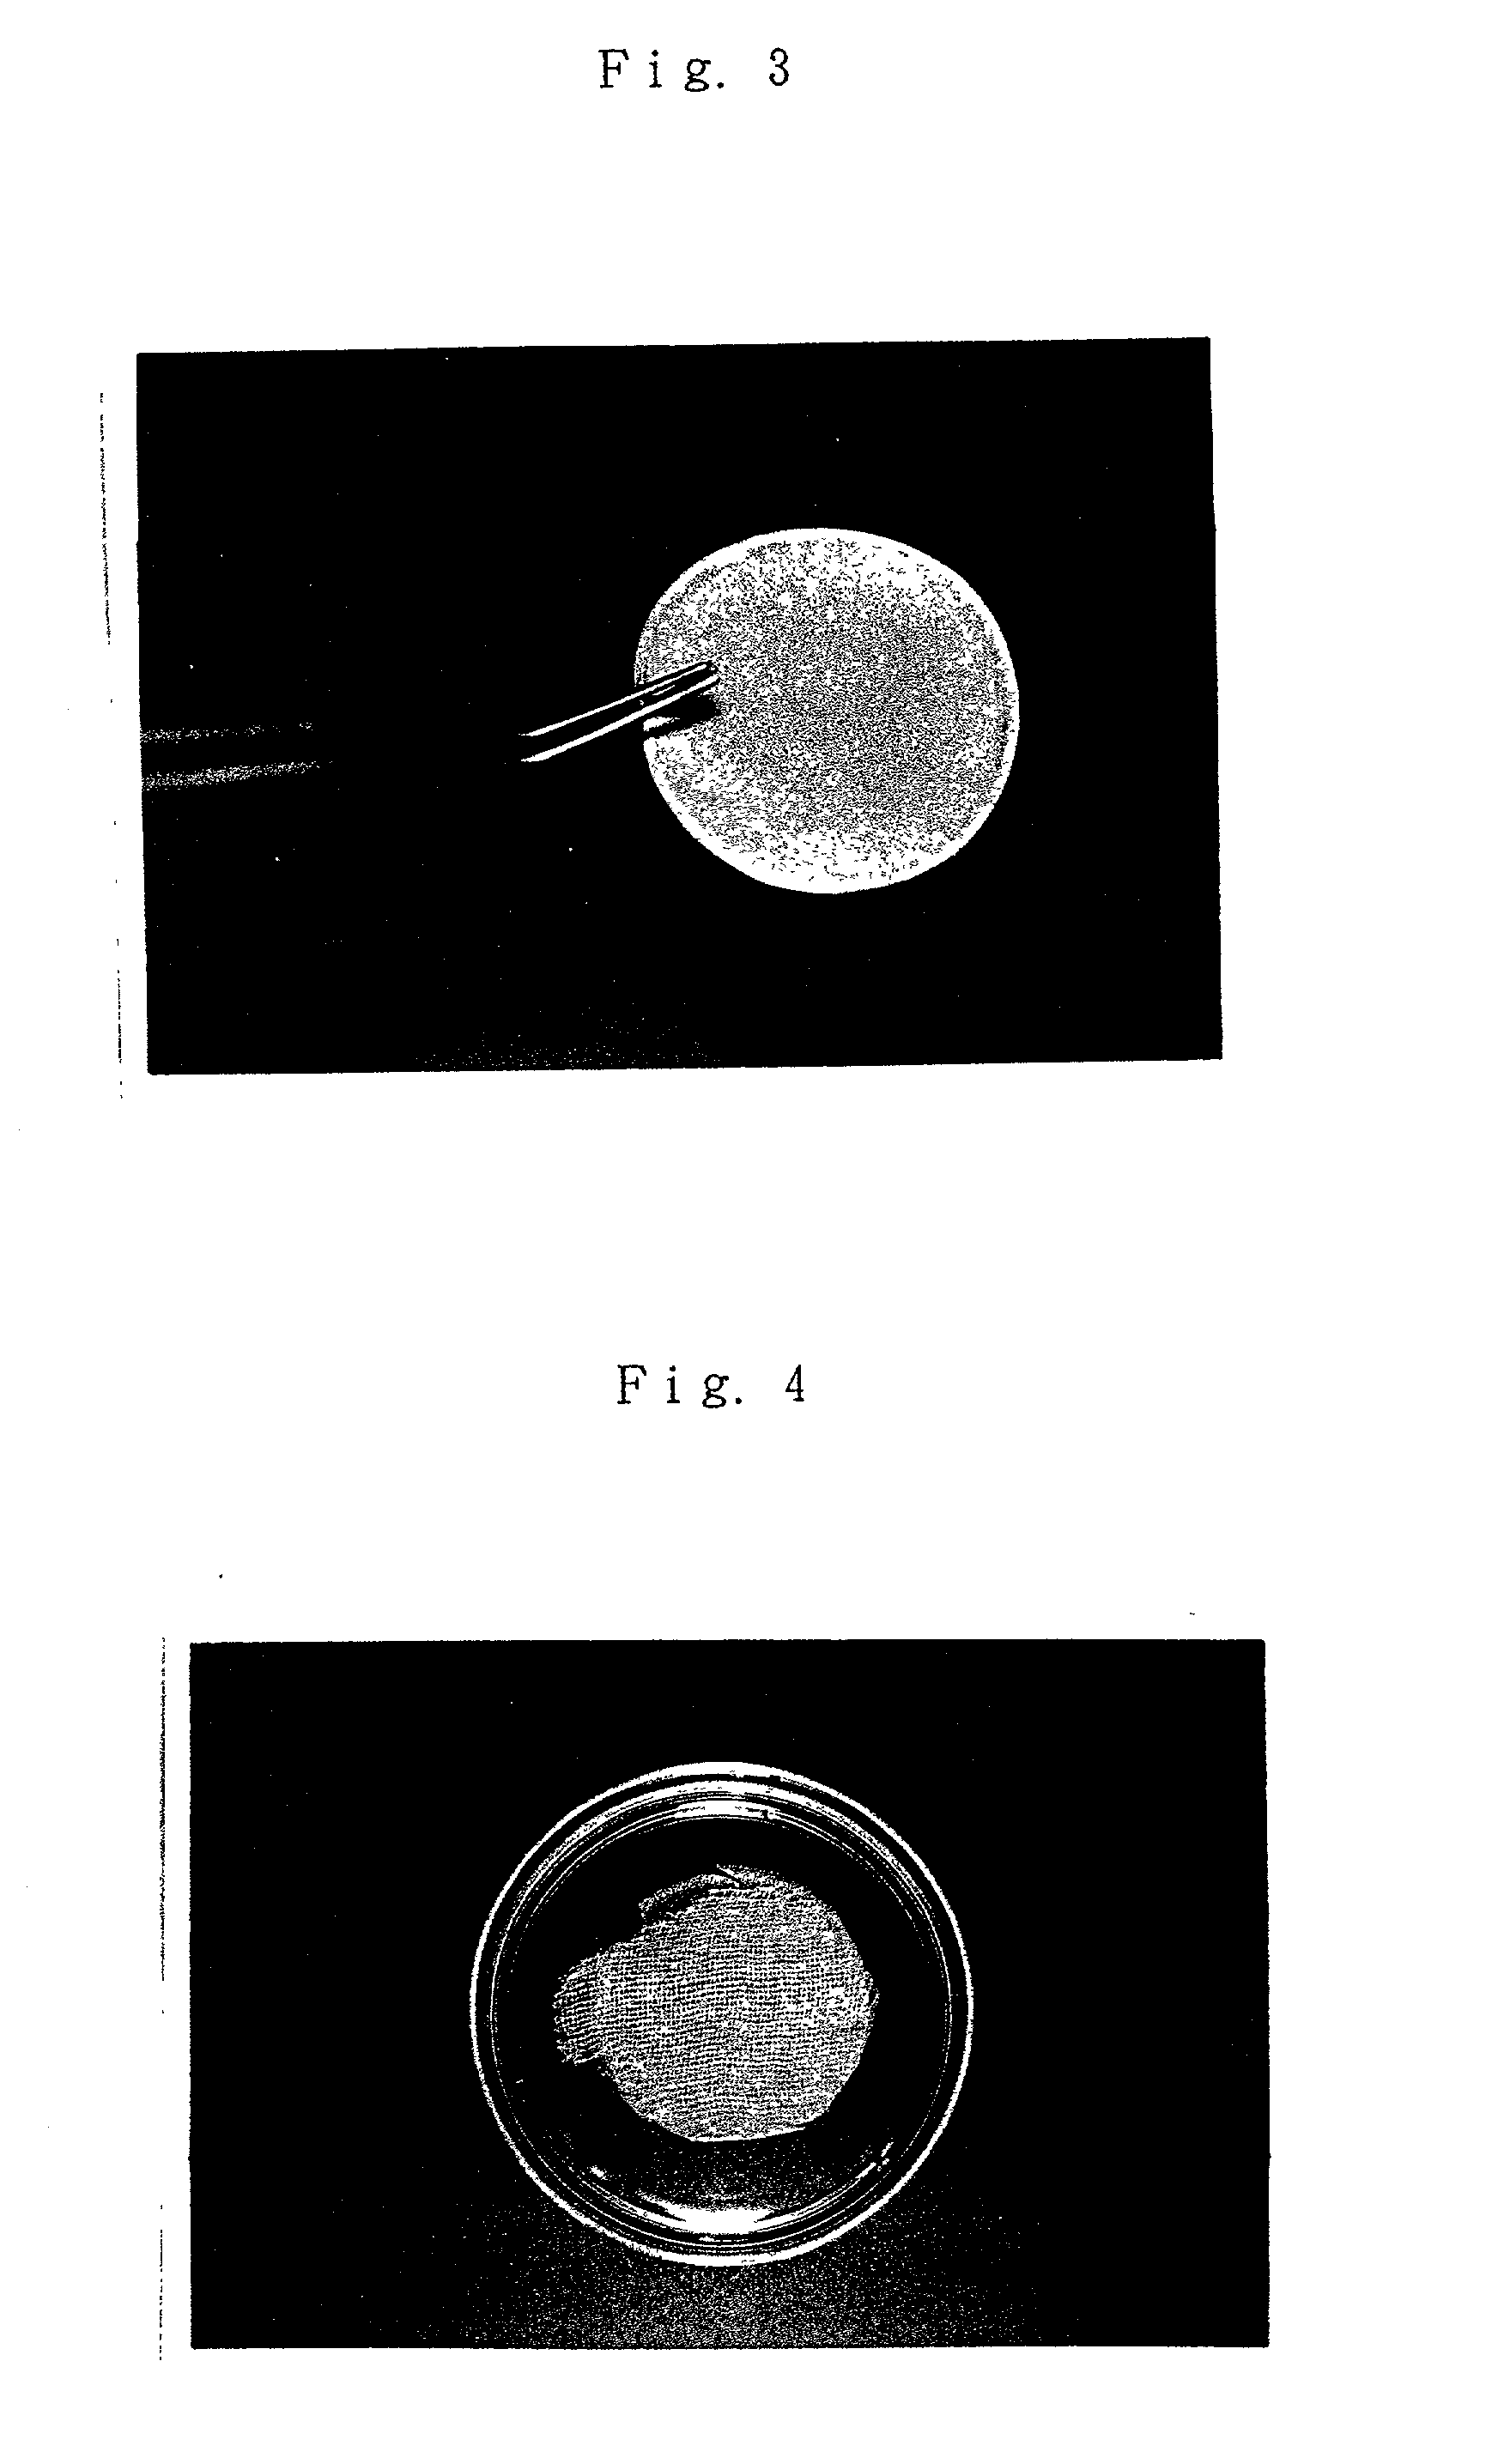 Hydrogel thin film containing extracellular matrix components